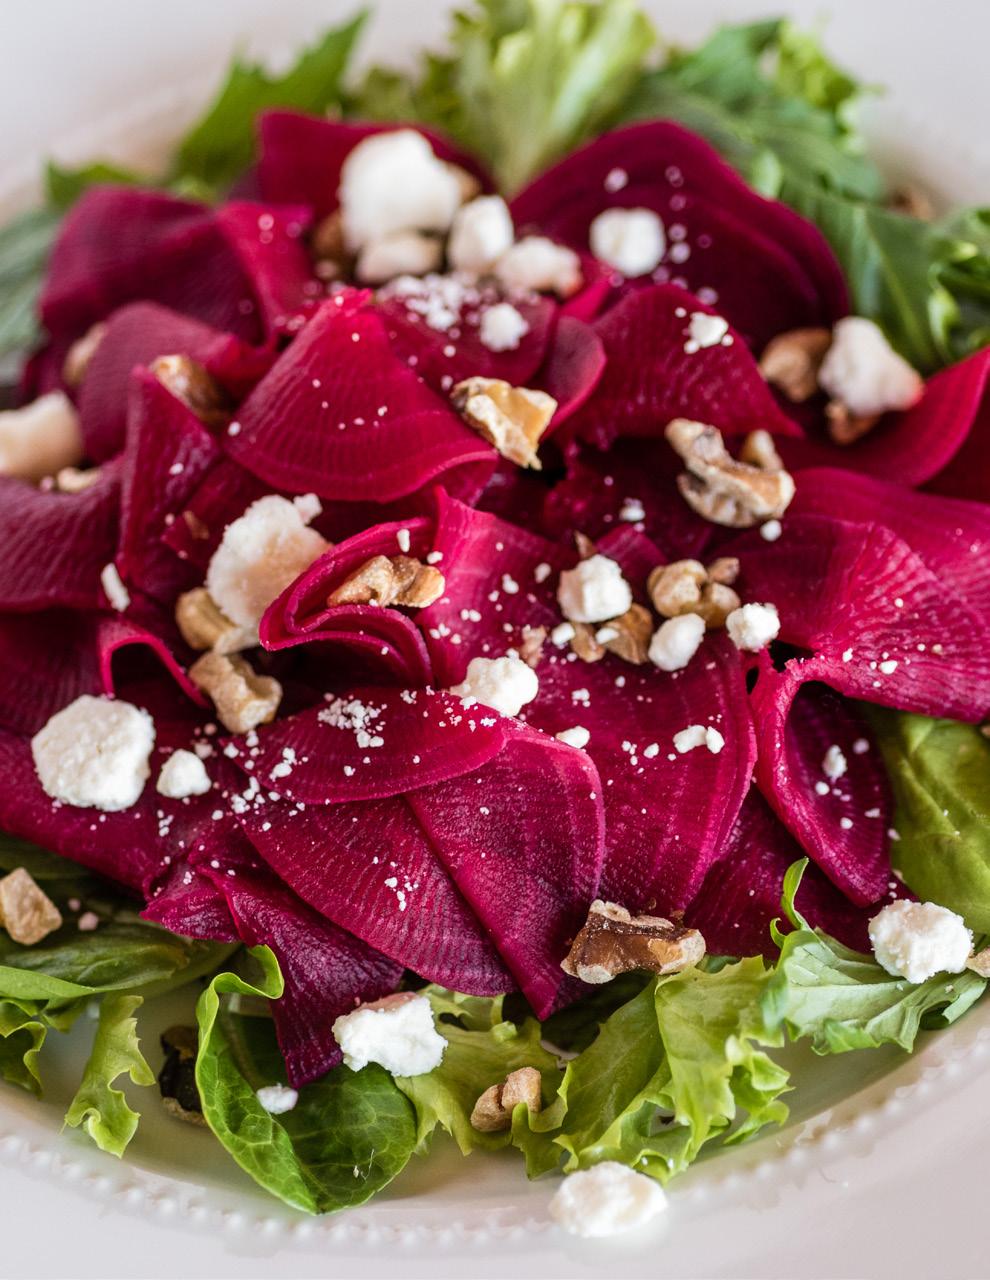 Beets with Orange & Goat Cheese Salad Serves: 8 2 pounds fresh beets (about 6 medium), peeled 3 teaspoons salt, divided 6 tablespoons fresh orange juice 1/2 cup vegetable oil 2 tablespoons rice